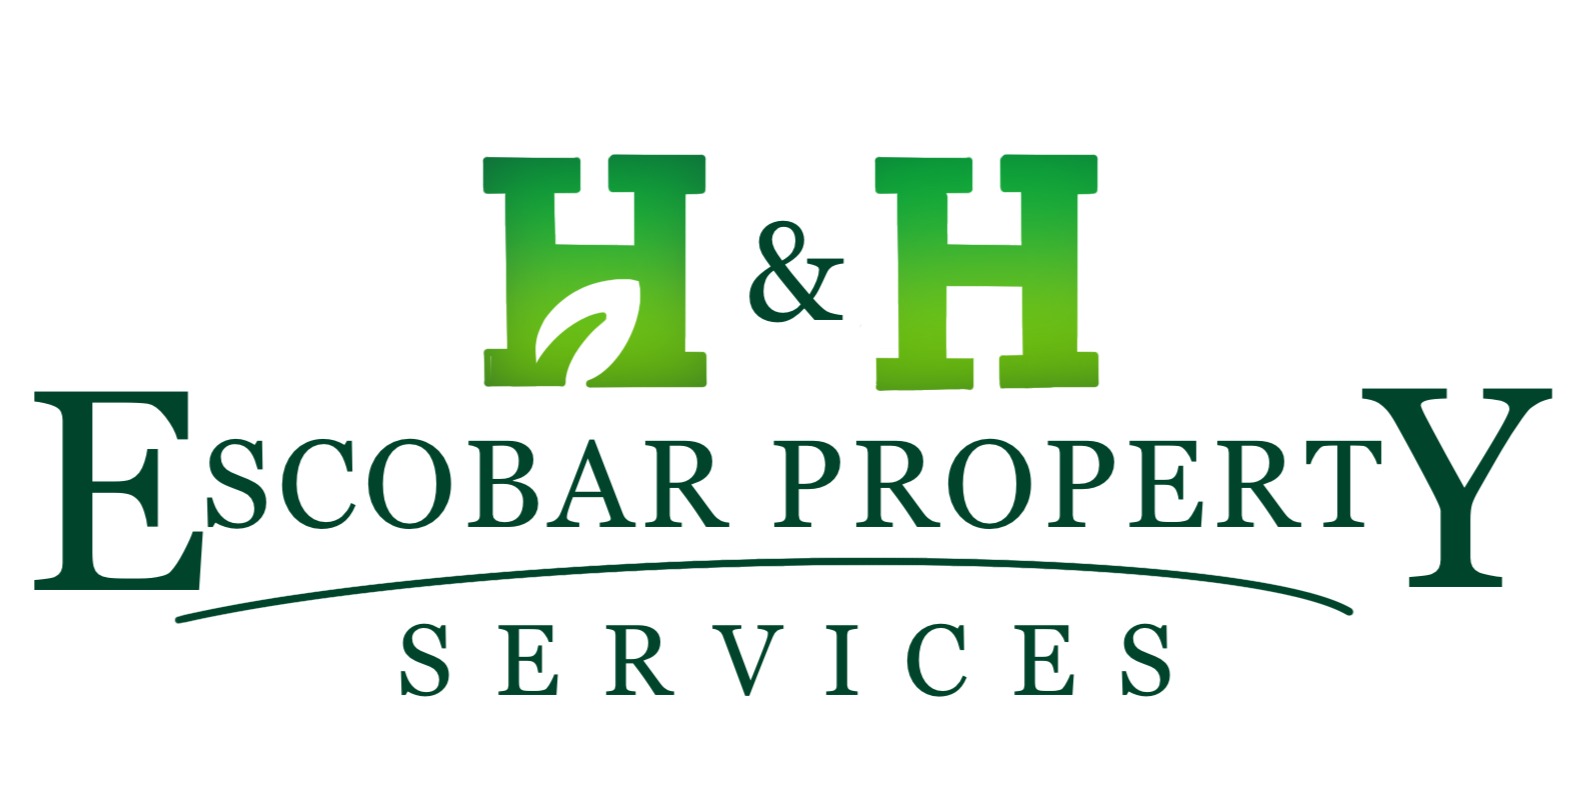 HHPSTX logo that links you to H&H Escobar Property Services for landscaping services.